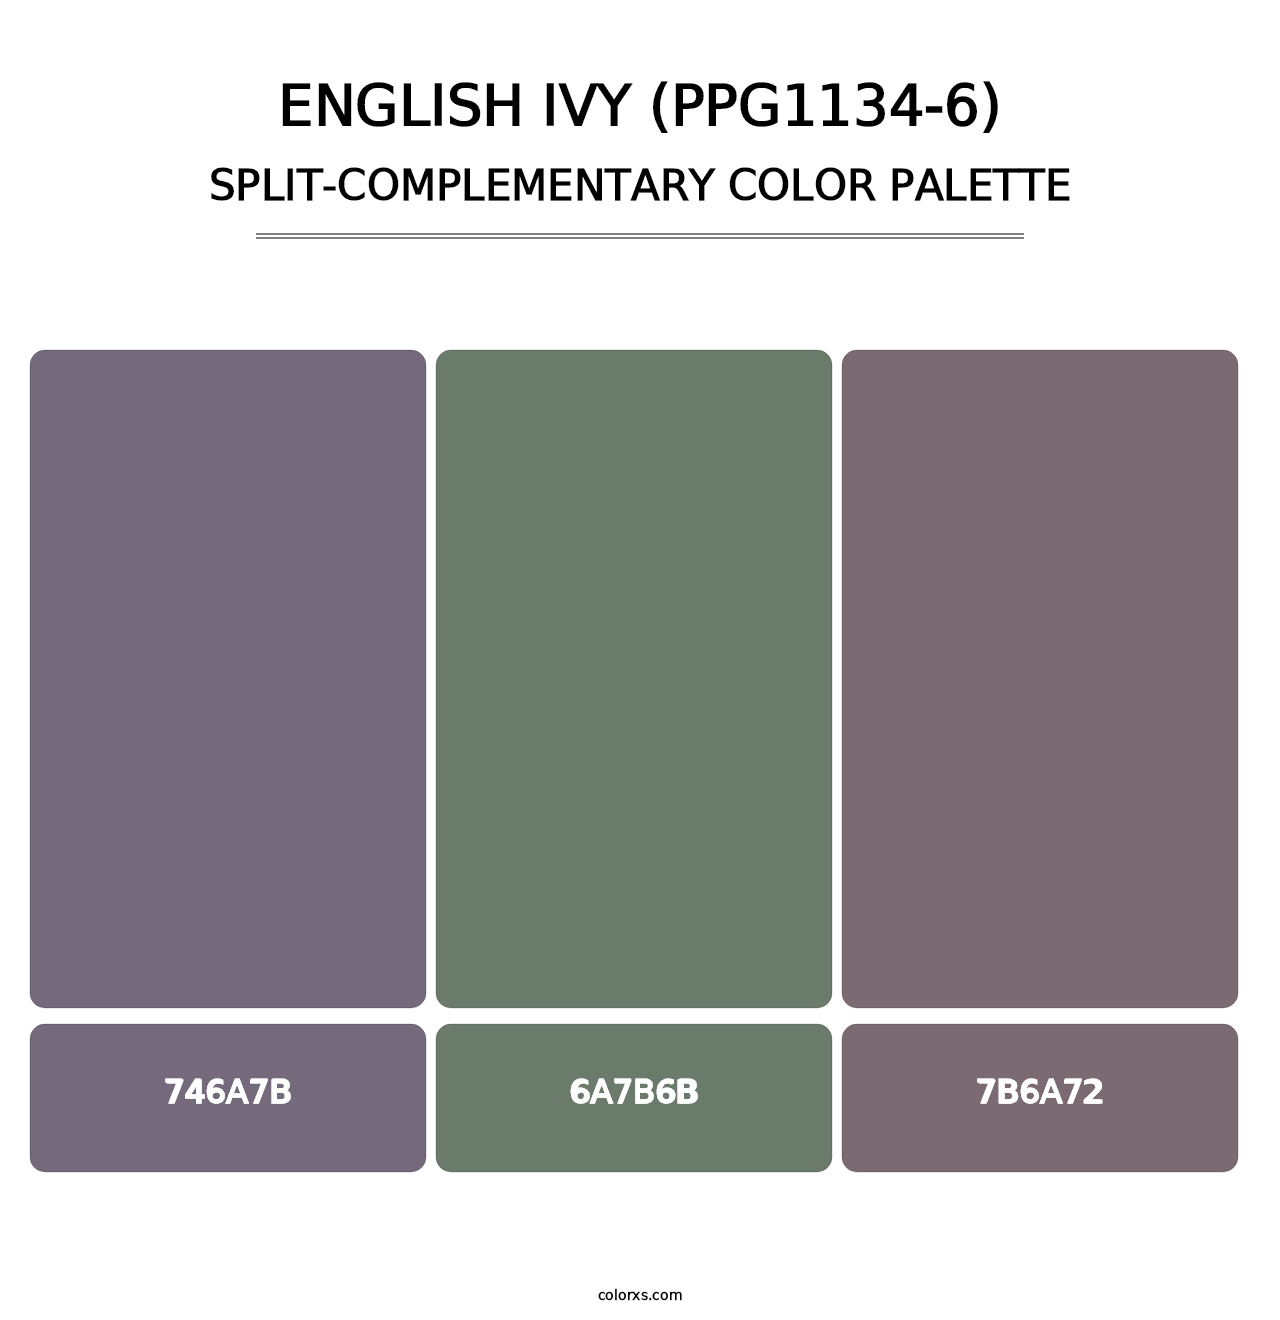 English Ivy (PPG1134-6) - Split-Complementary Color Palette